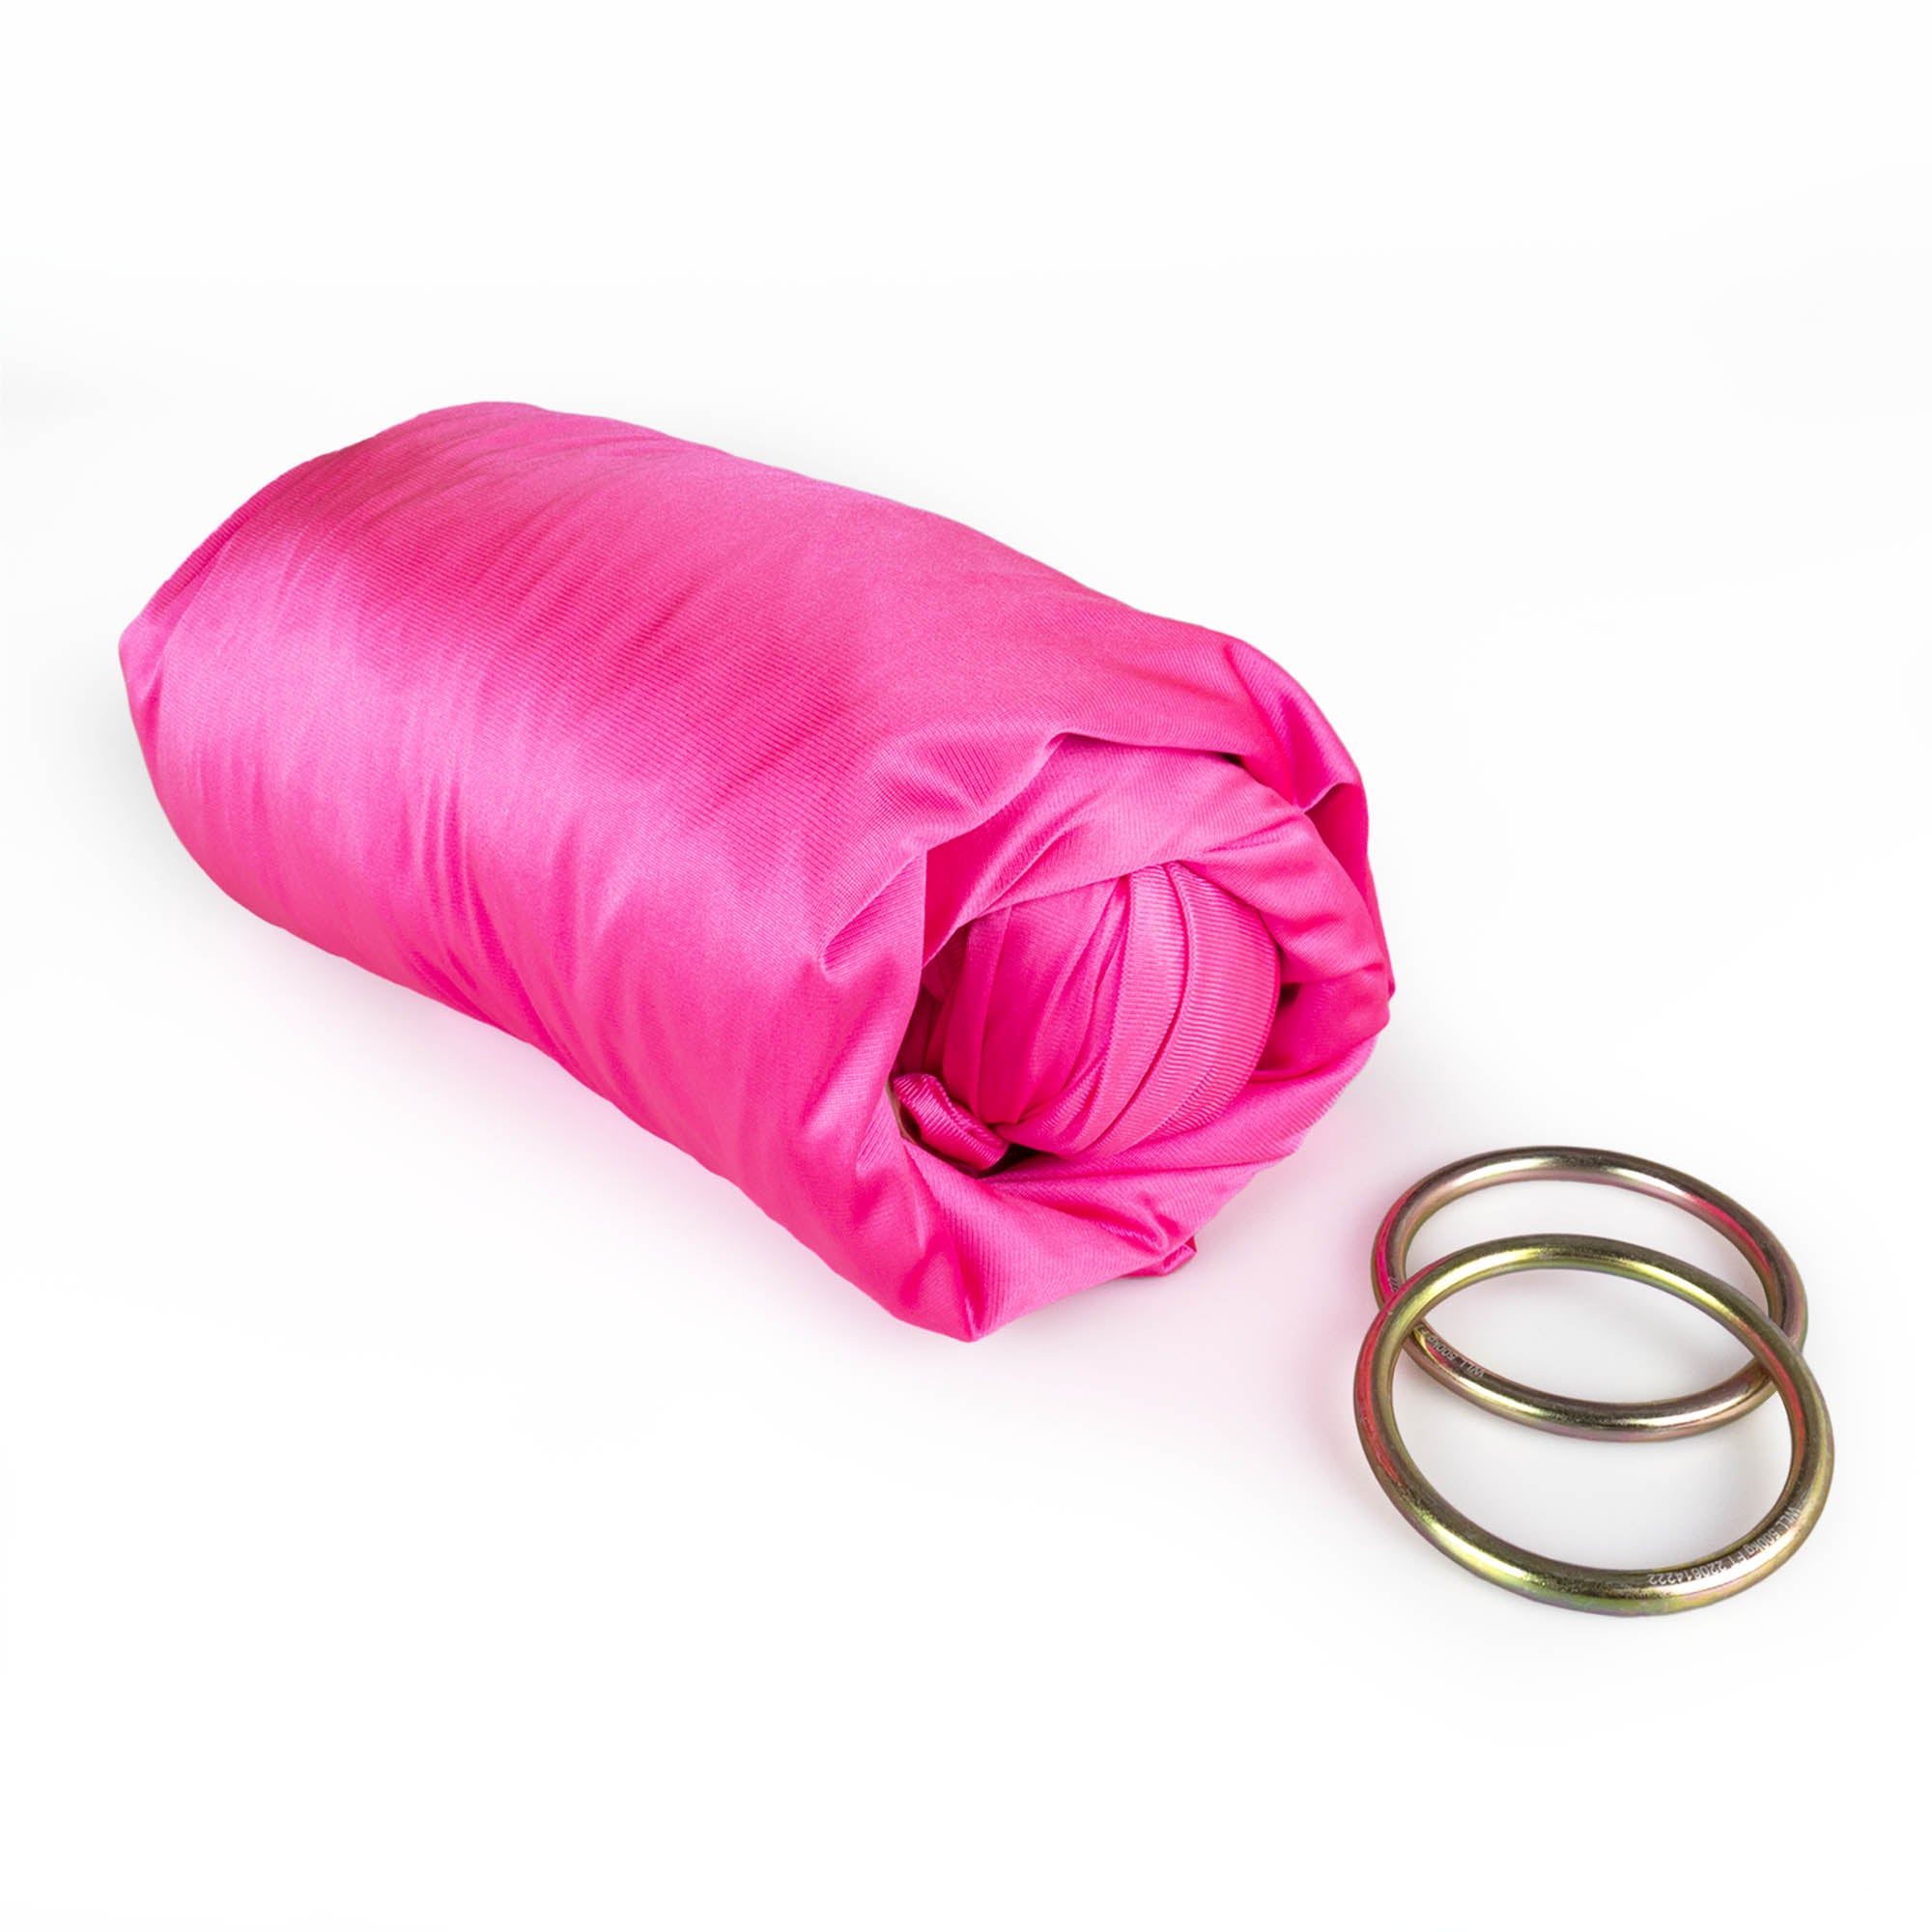 Pink yoga hammock rolled up with ring dettached